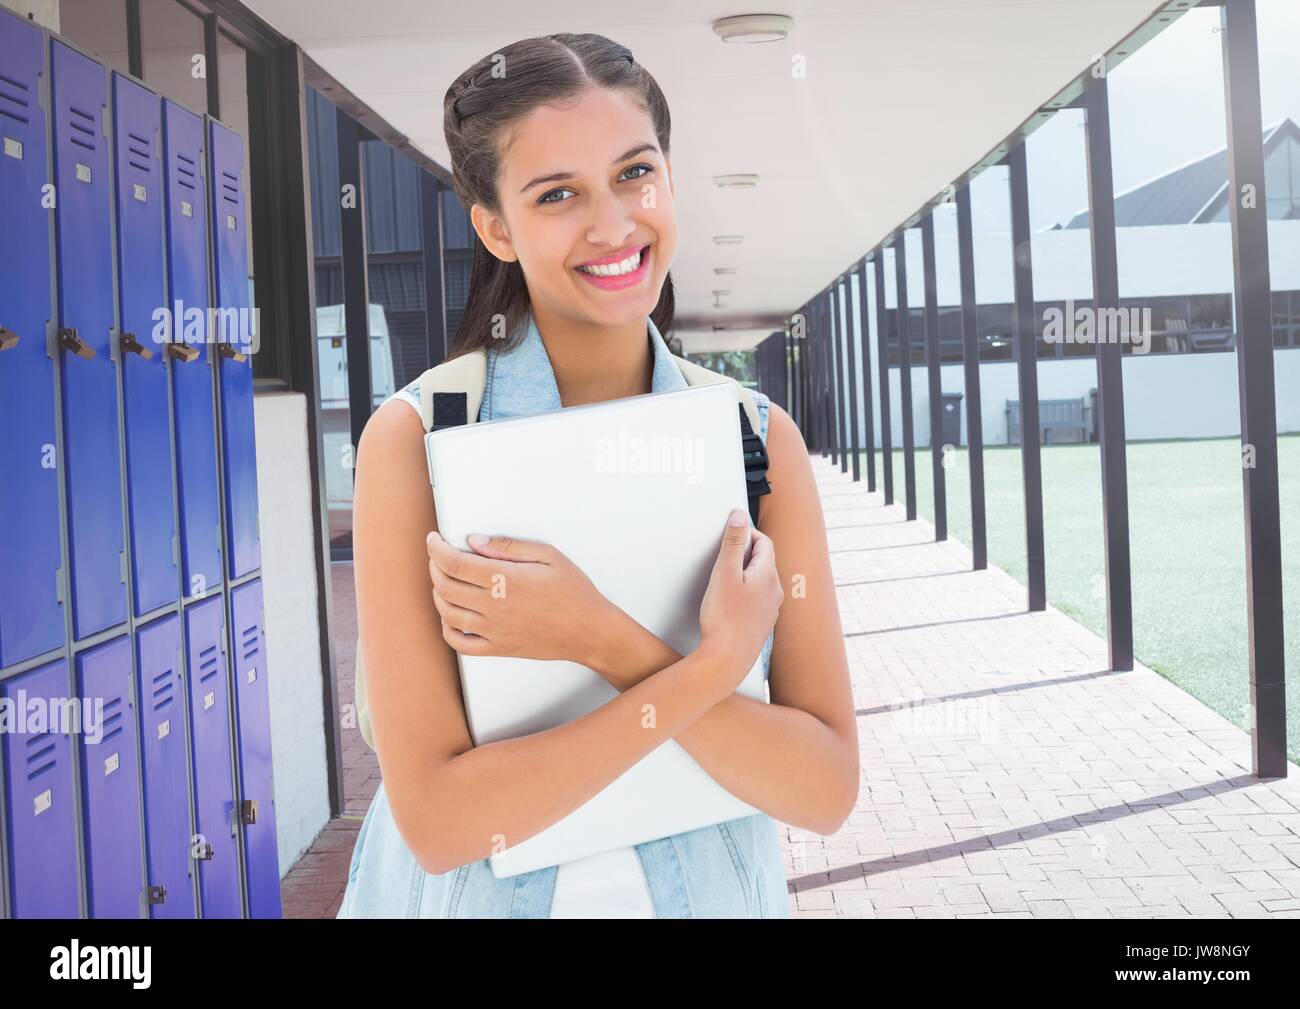 Digital composite of female student holding file in front of lockers Stock Photo